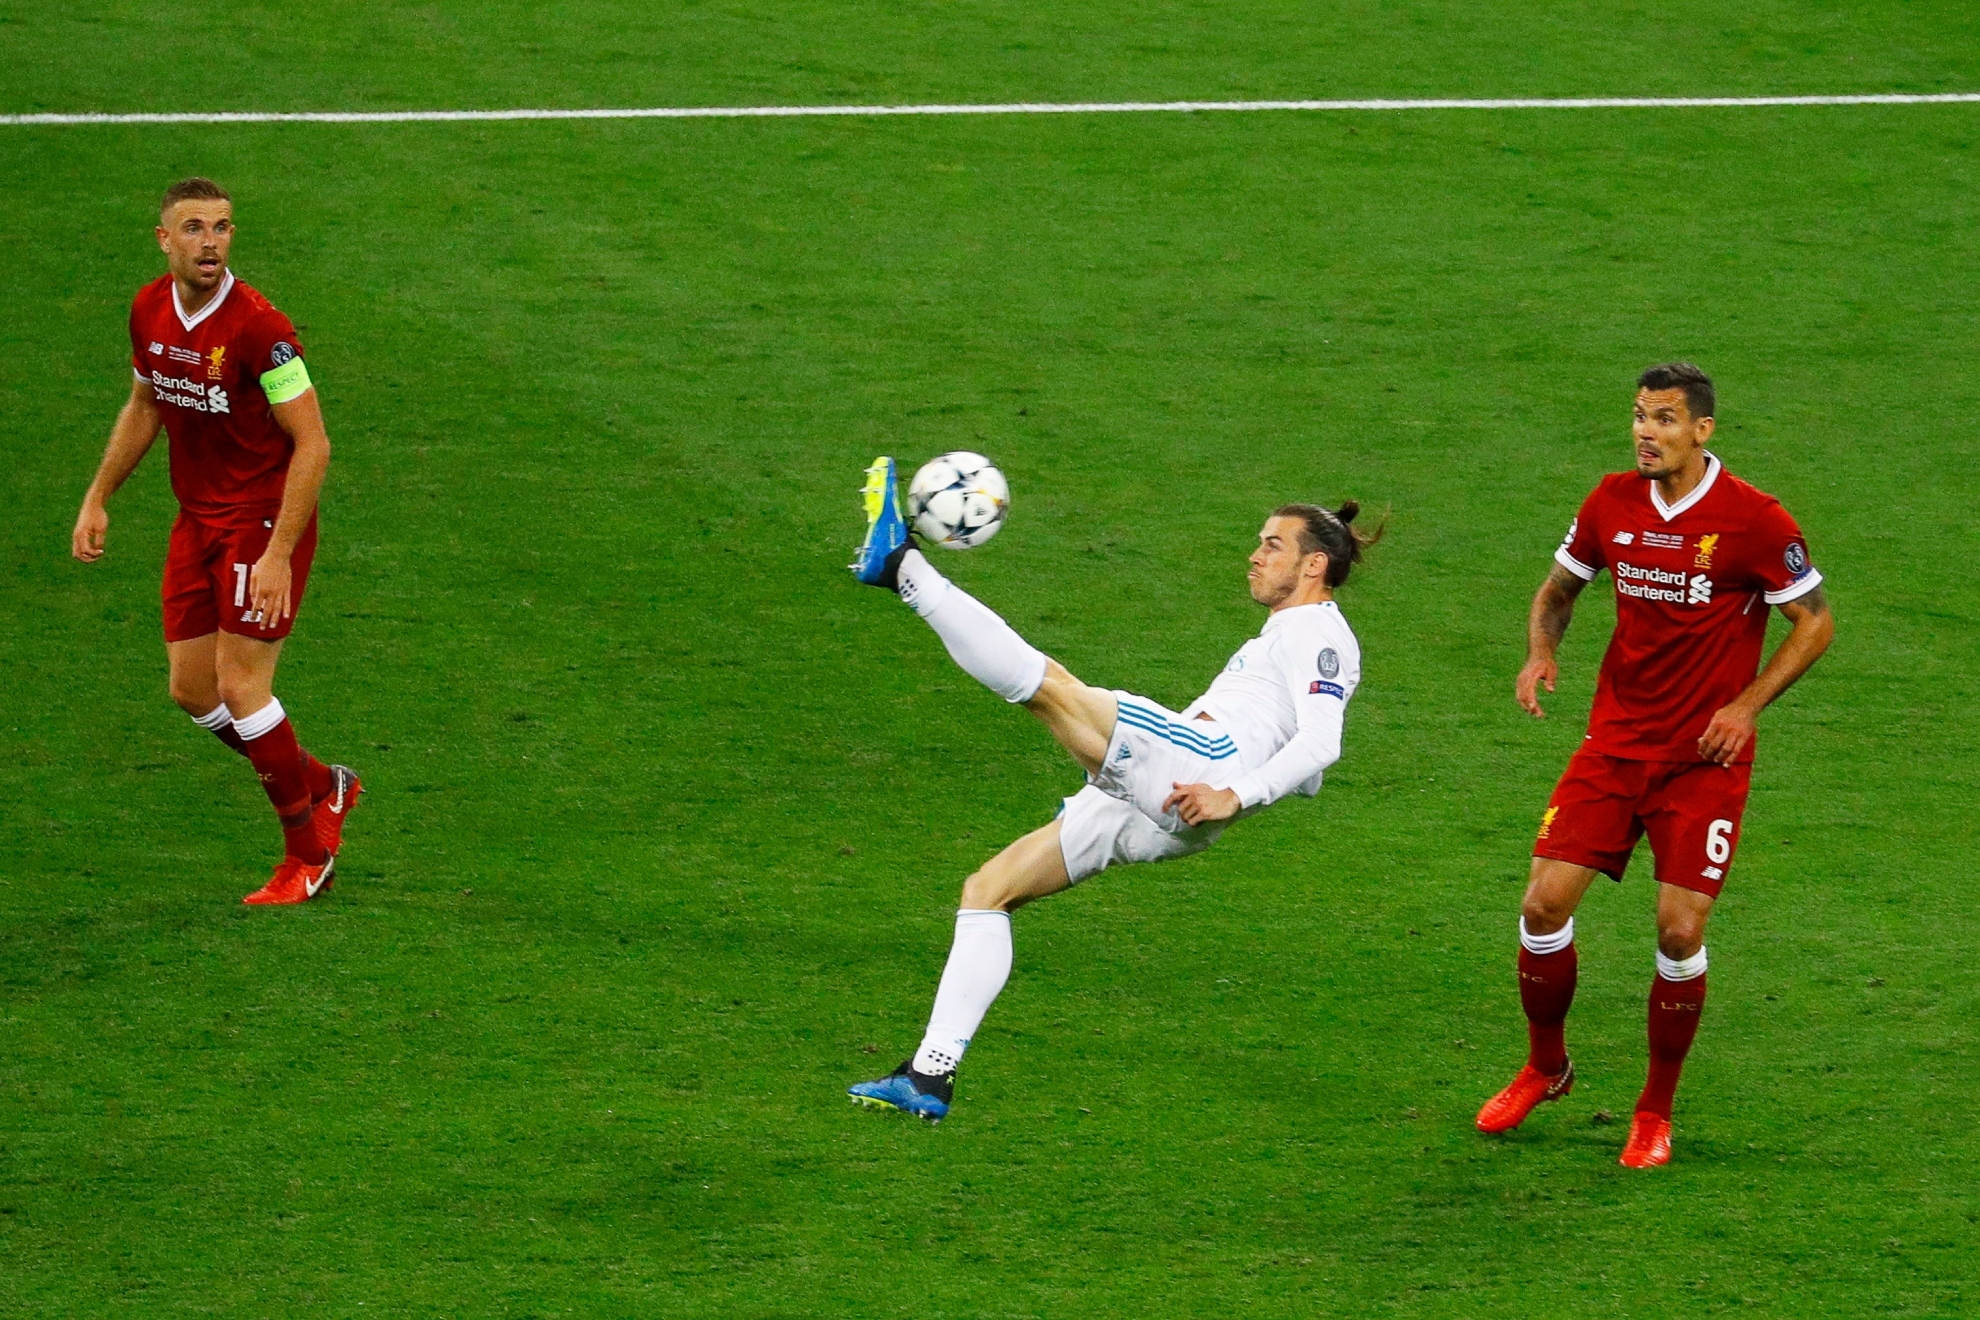 Gareth Bale scores in the 2018 Champions League final against Liverpool